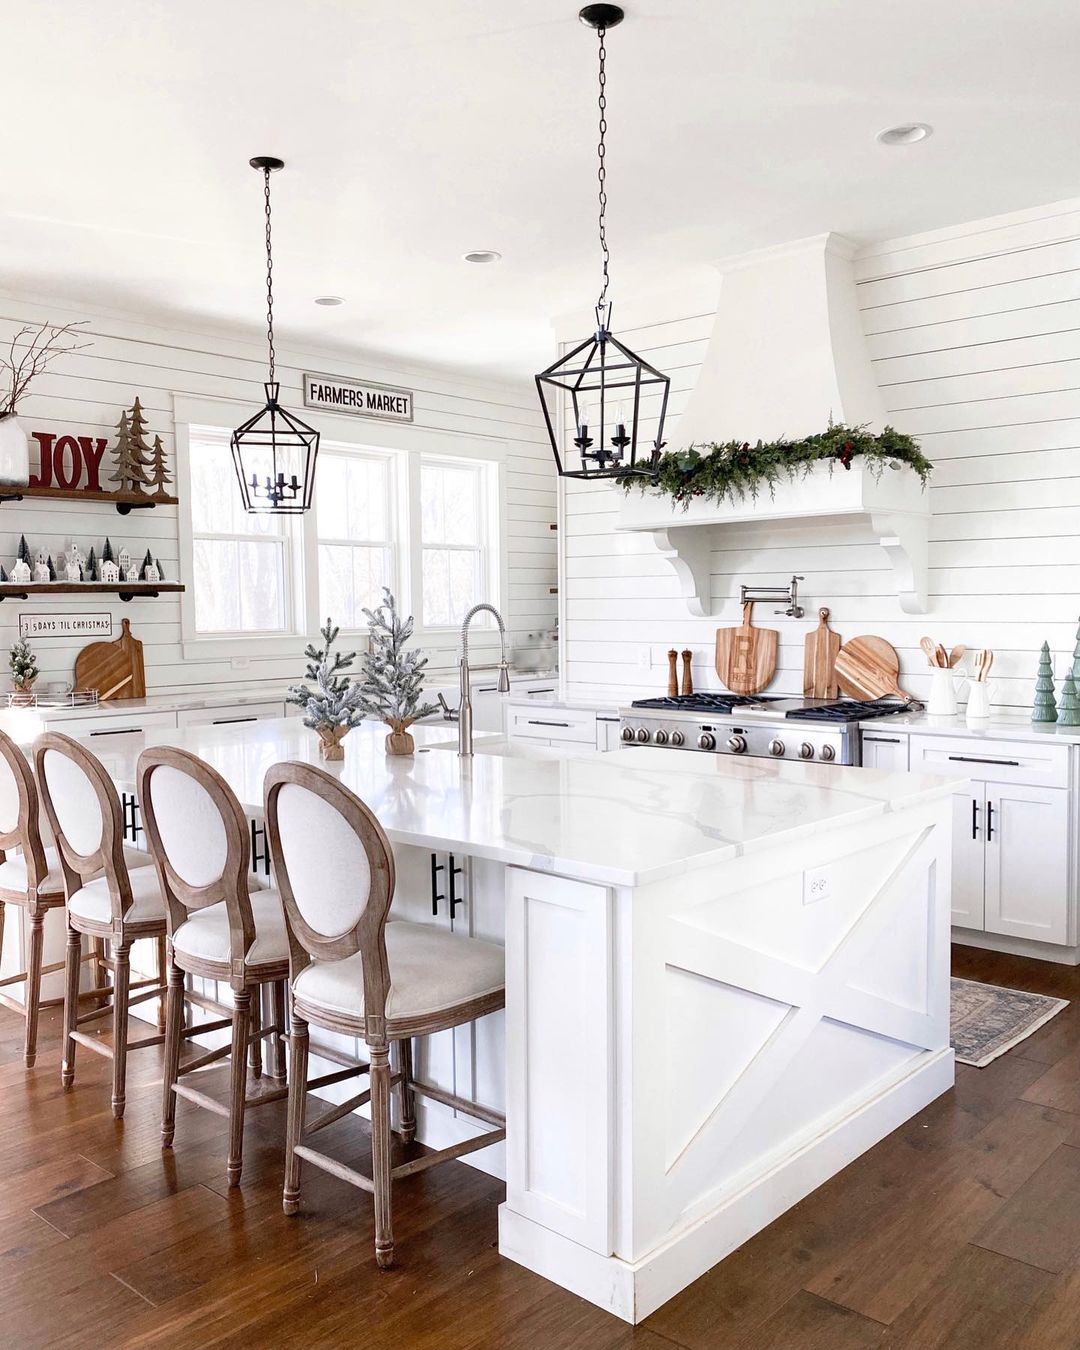 Bright and Festive with Shiplap Walls